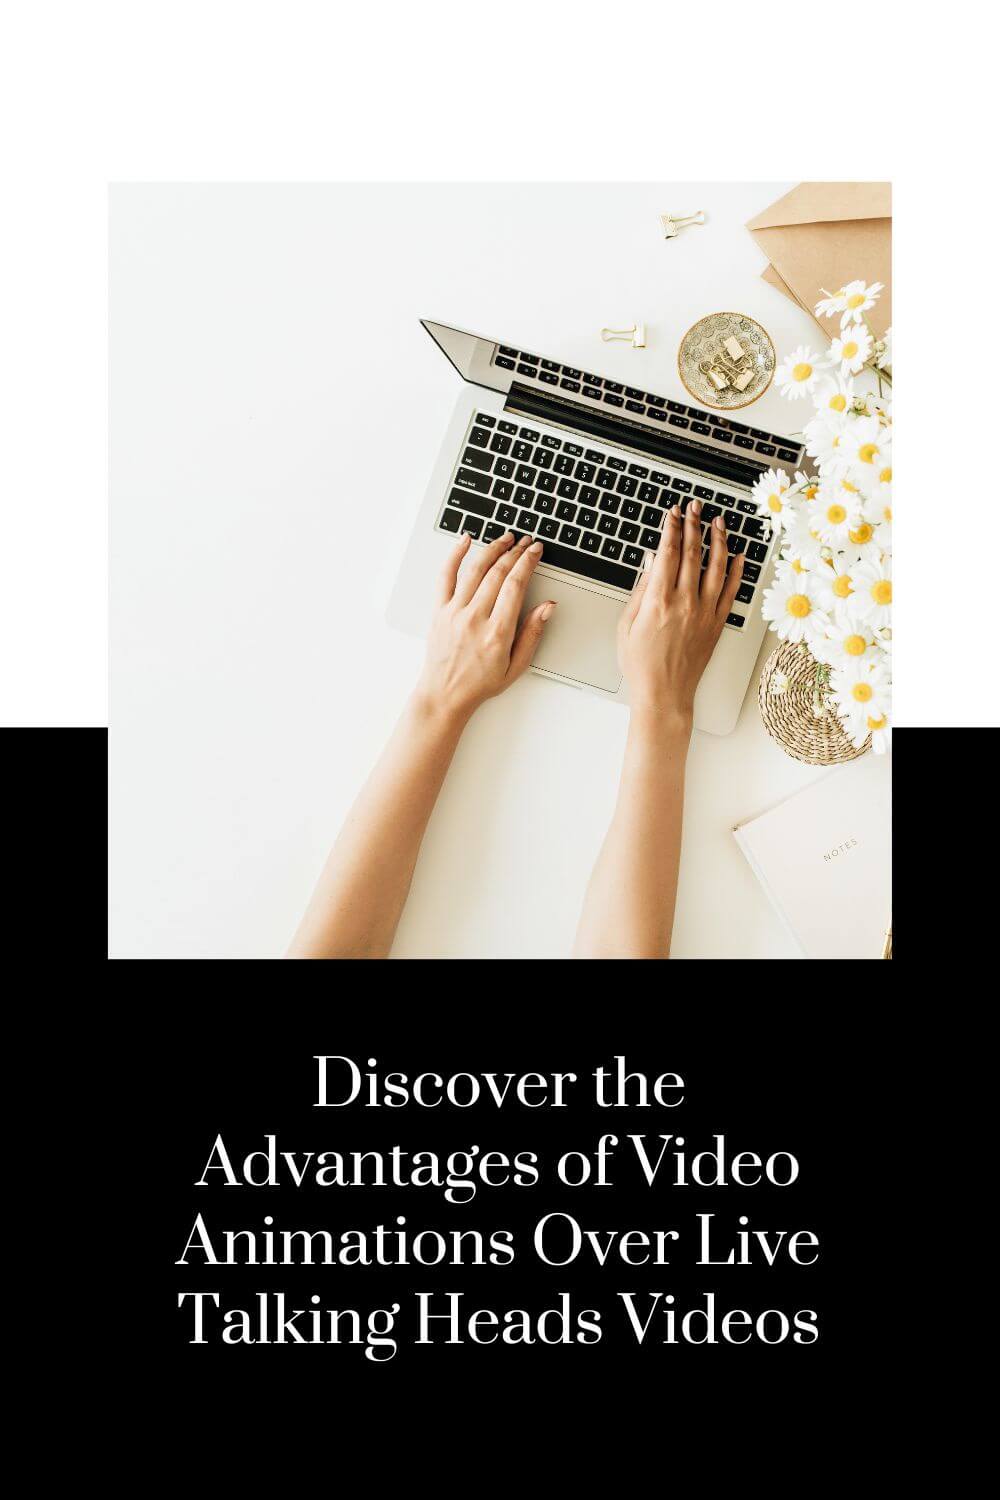 Discover the Advantages of Video Animations Over Live Talking Heads Videos